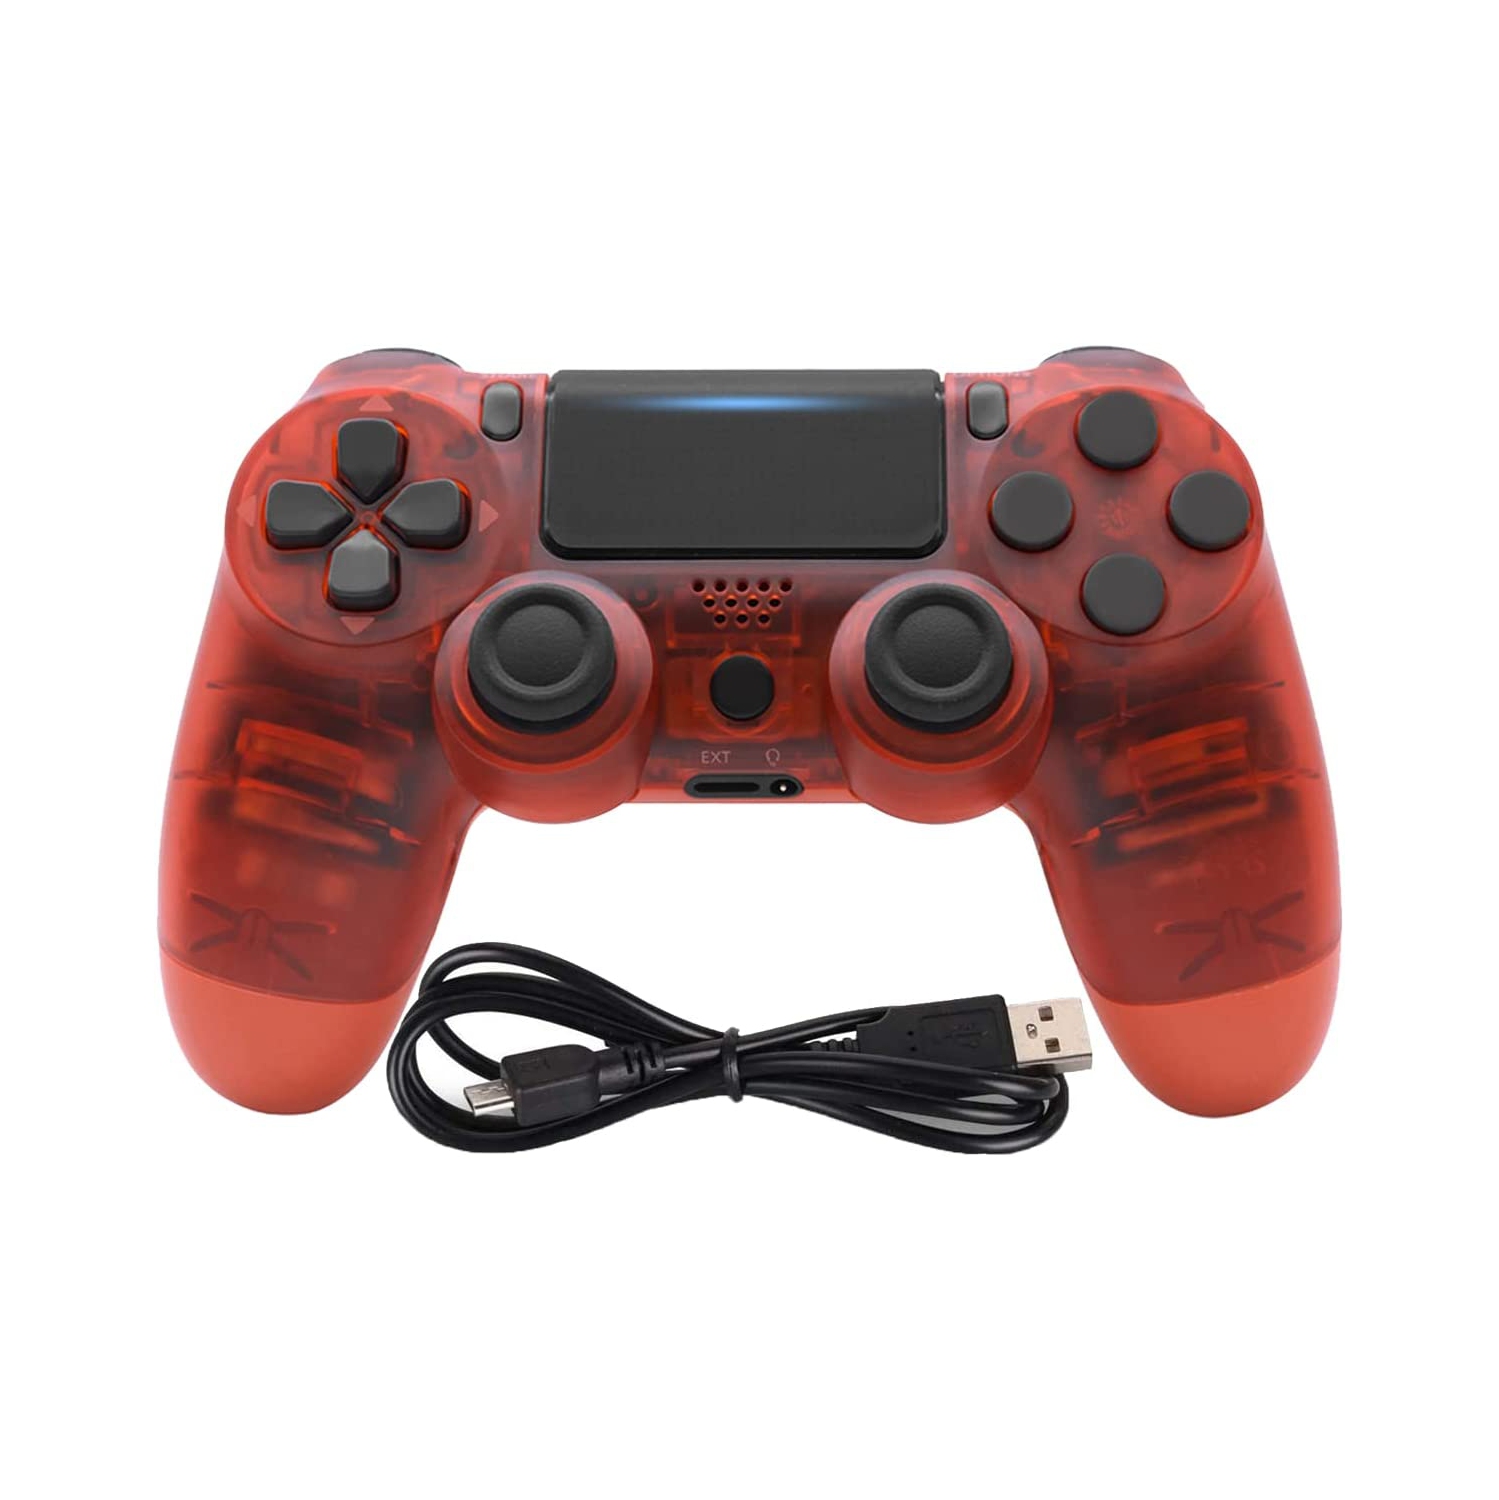 Wireless Controller Compatible for PS4 Playstation 4 / Slim/Pro Console, Double Vibration, 6-Axis Gyro Sensor, Speaker, Built-in Audio Jack with Charging Cable (Transparent red)